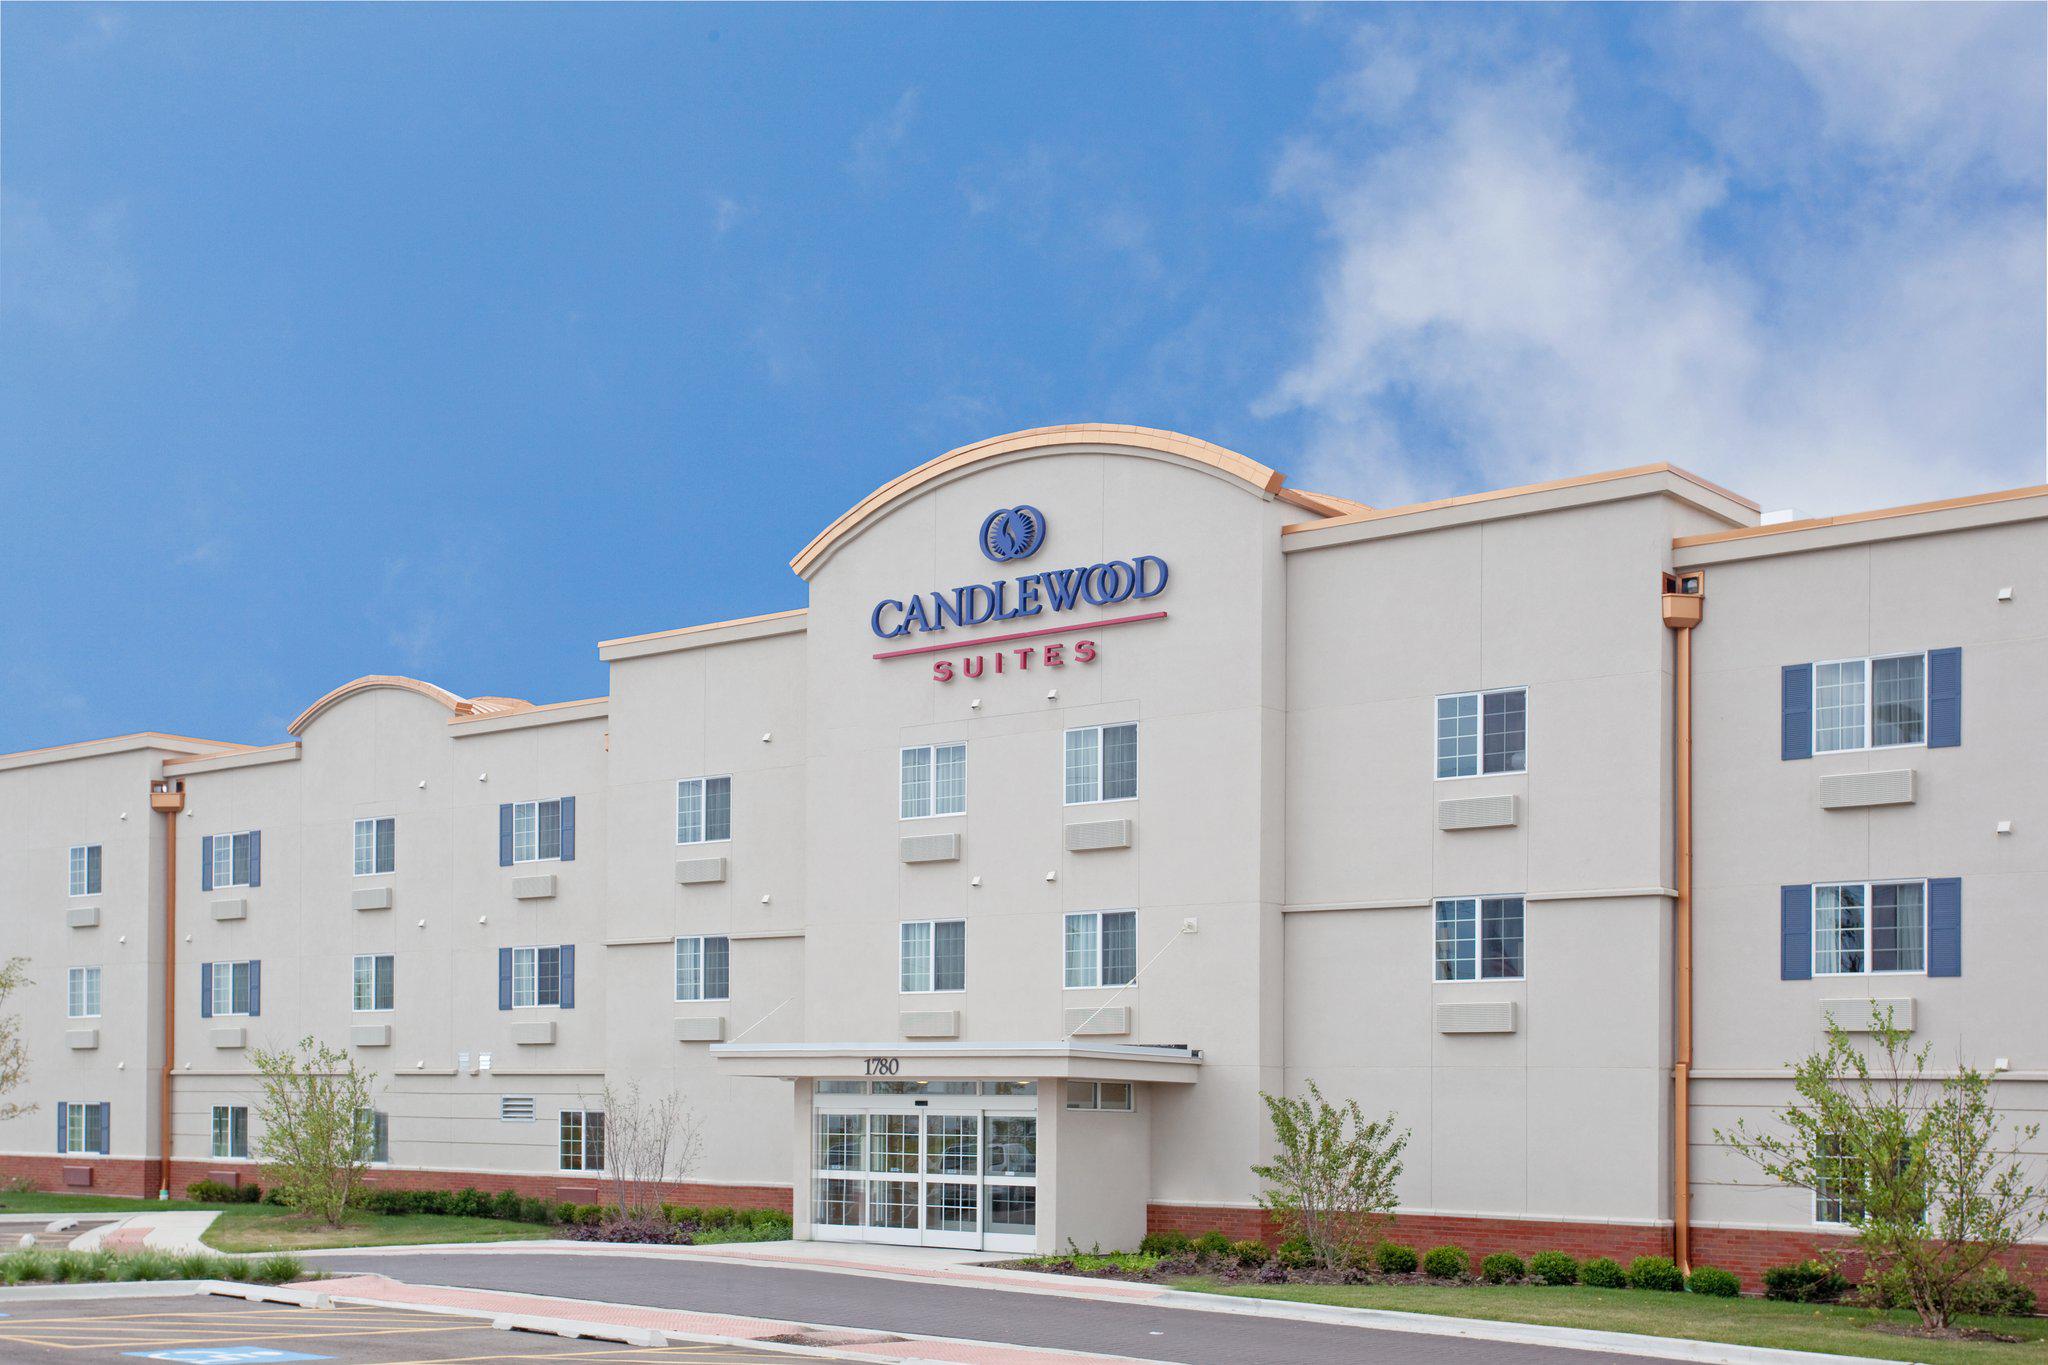 Candlewood Suites Elgin NW-Chicago Photo